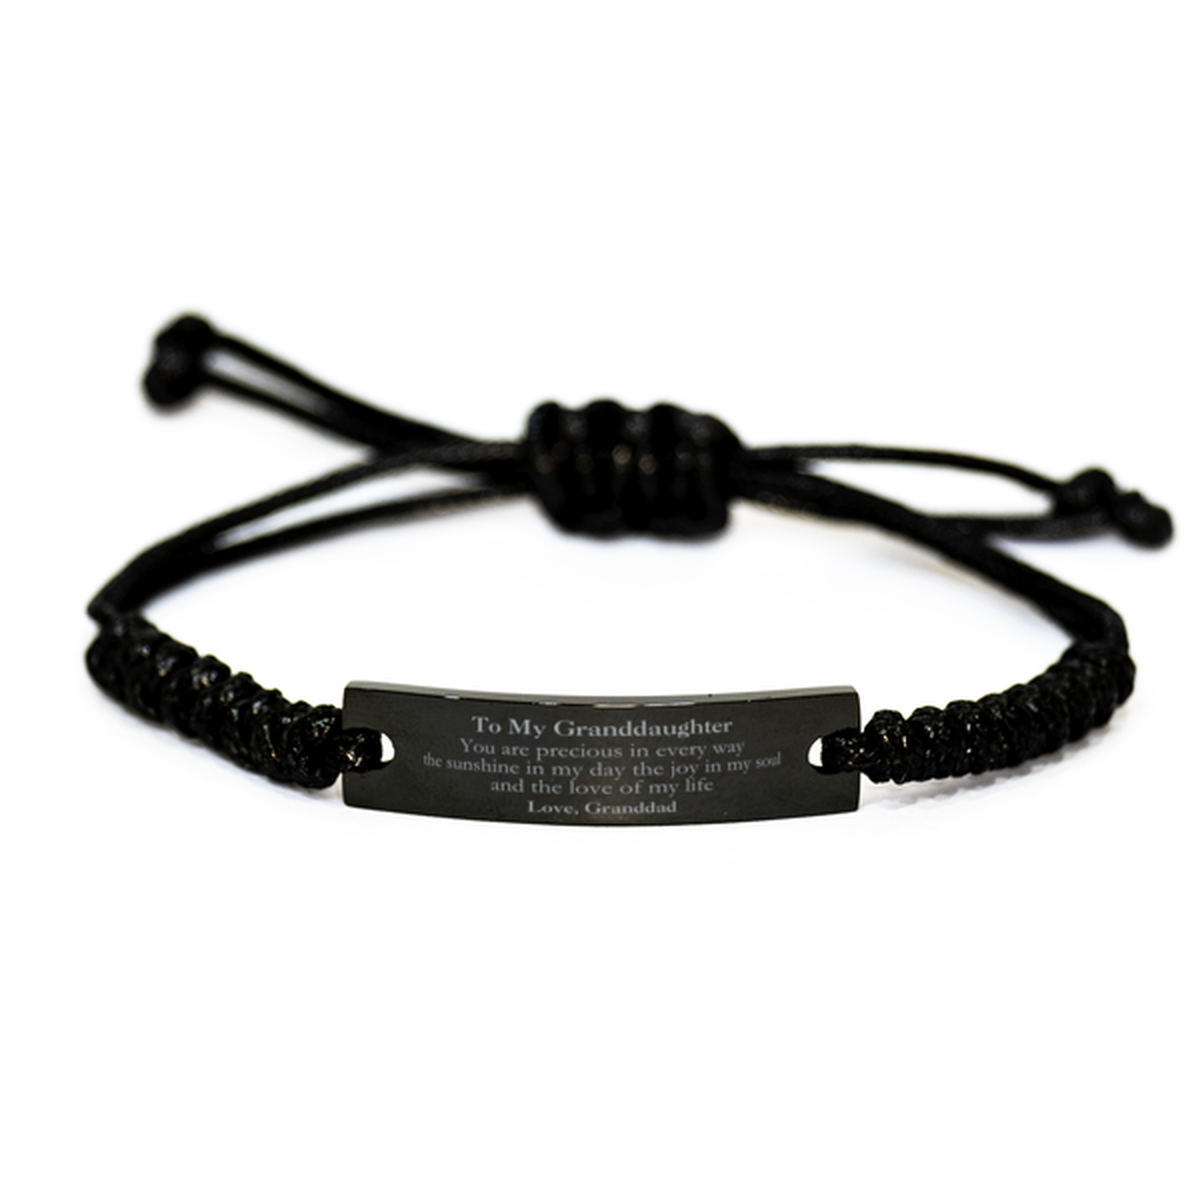 Graduation Gifts for Granddaughter Black Rope Bracelet Present from Granddad, Christmas Granddaughter Birthday Gifts Granddaughter You are precious in every way the sunshine in my day. Love, Granddad